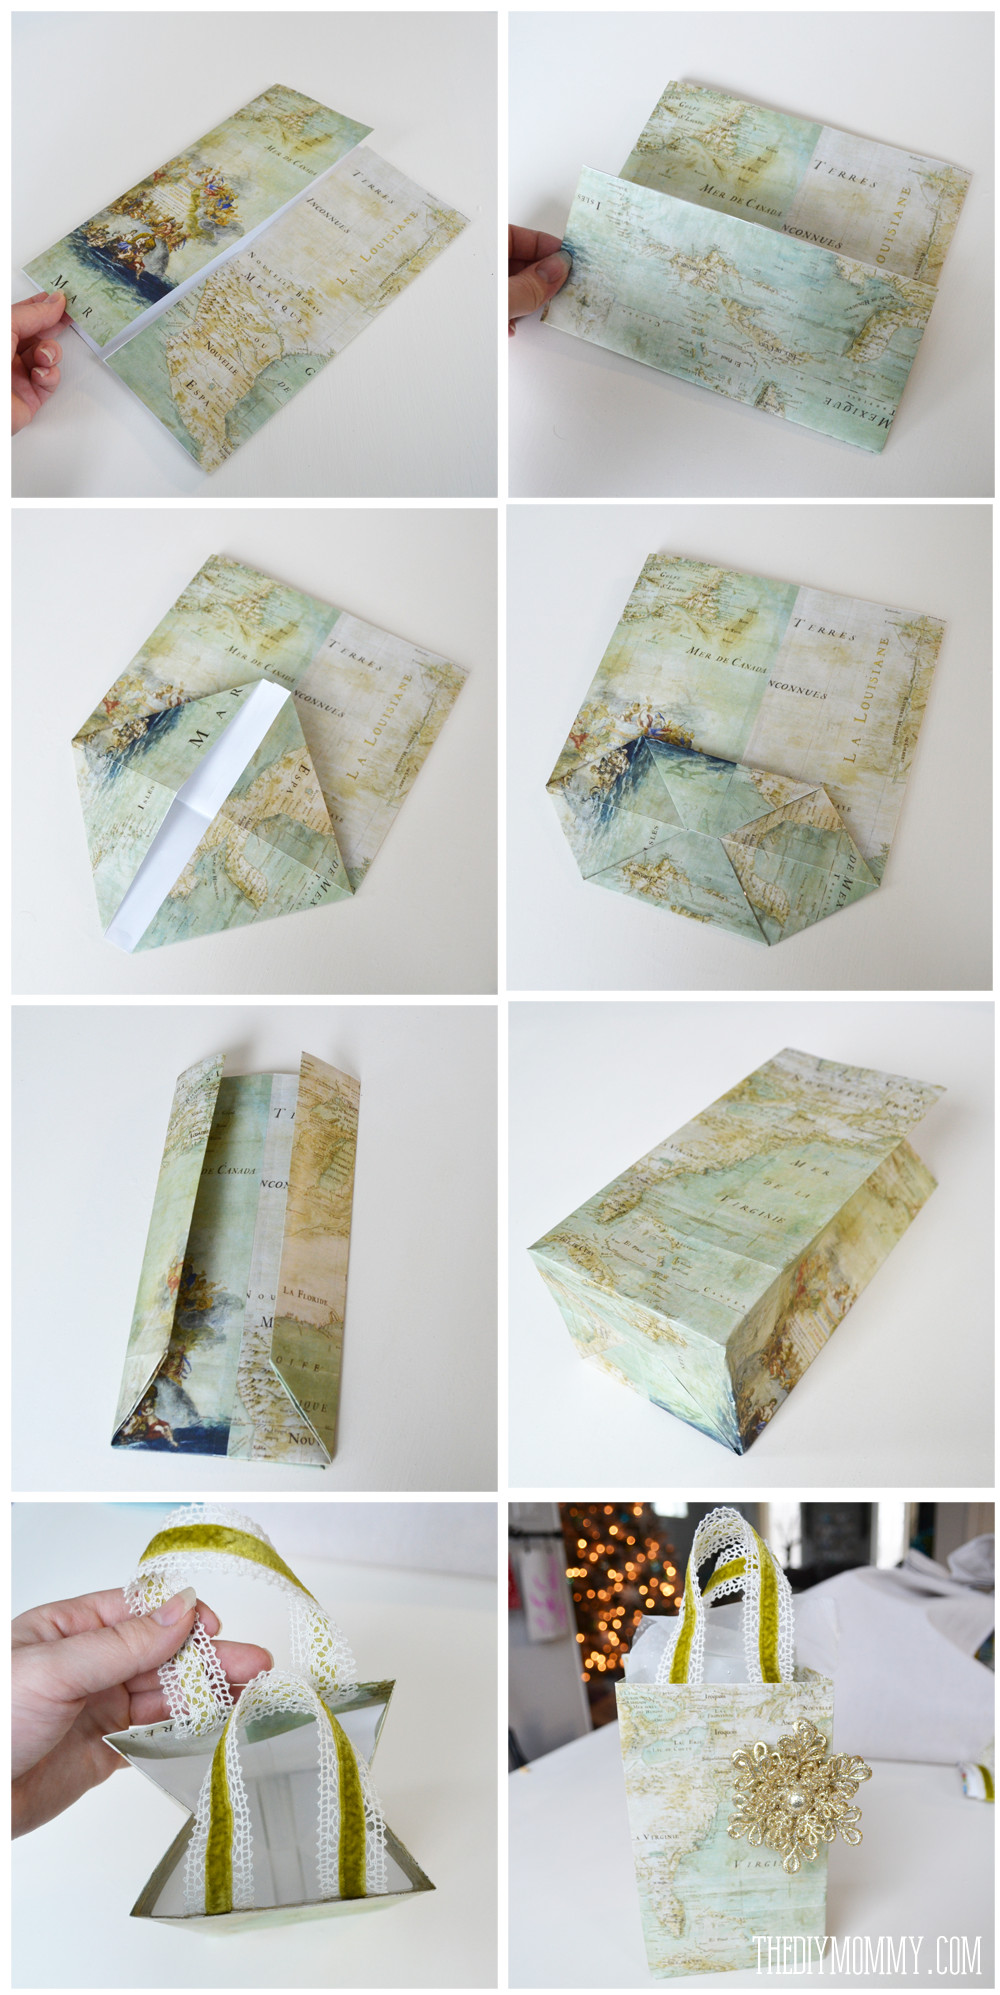 DIY Gift Bags From Wrapping Paper
 DIY Vintage Map Christmas Gift Wrap and Gift Bags